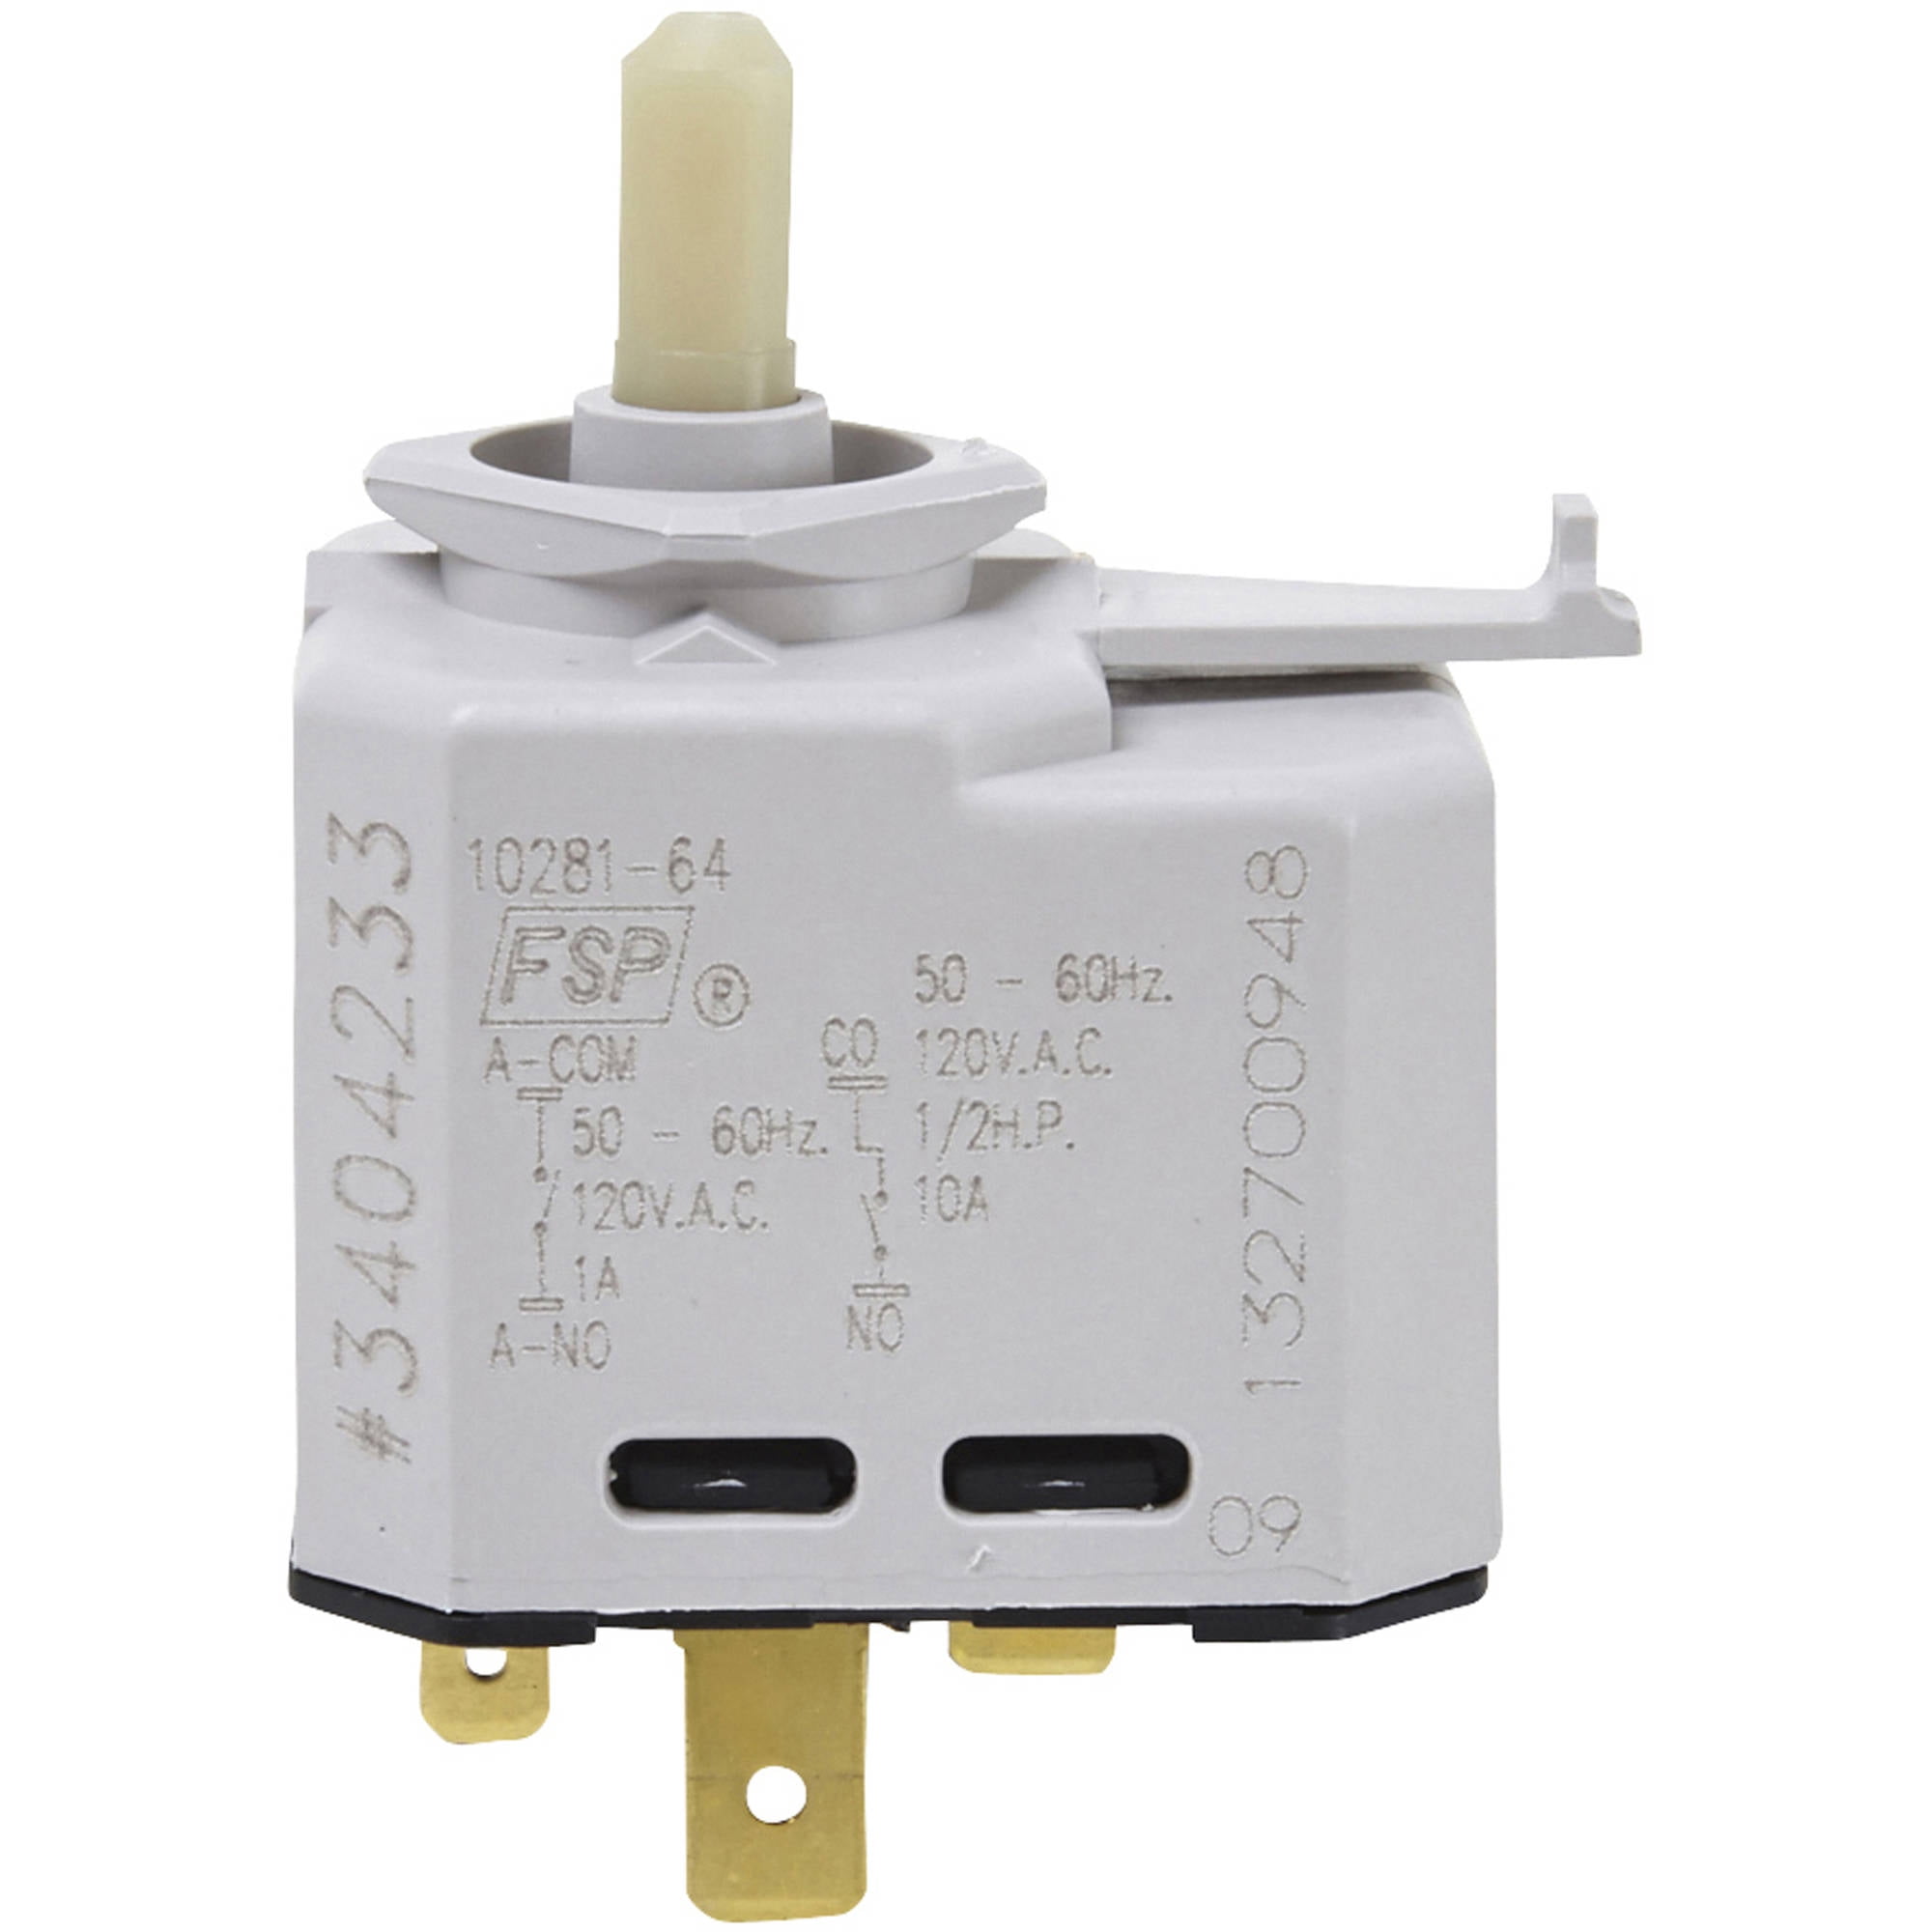 Details about   Whirlpool dryer rotary switch 3405156 